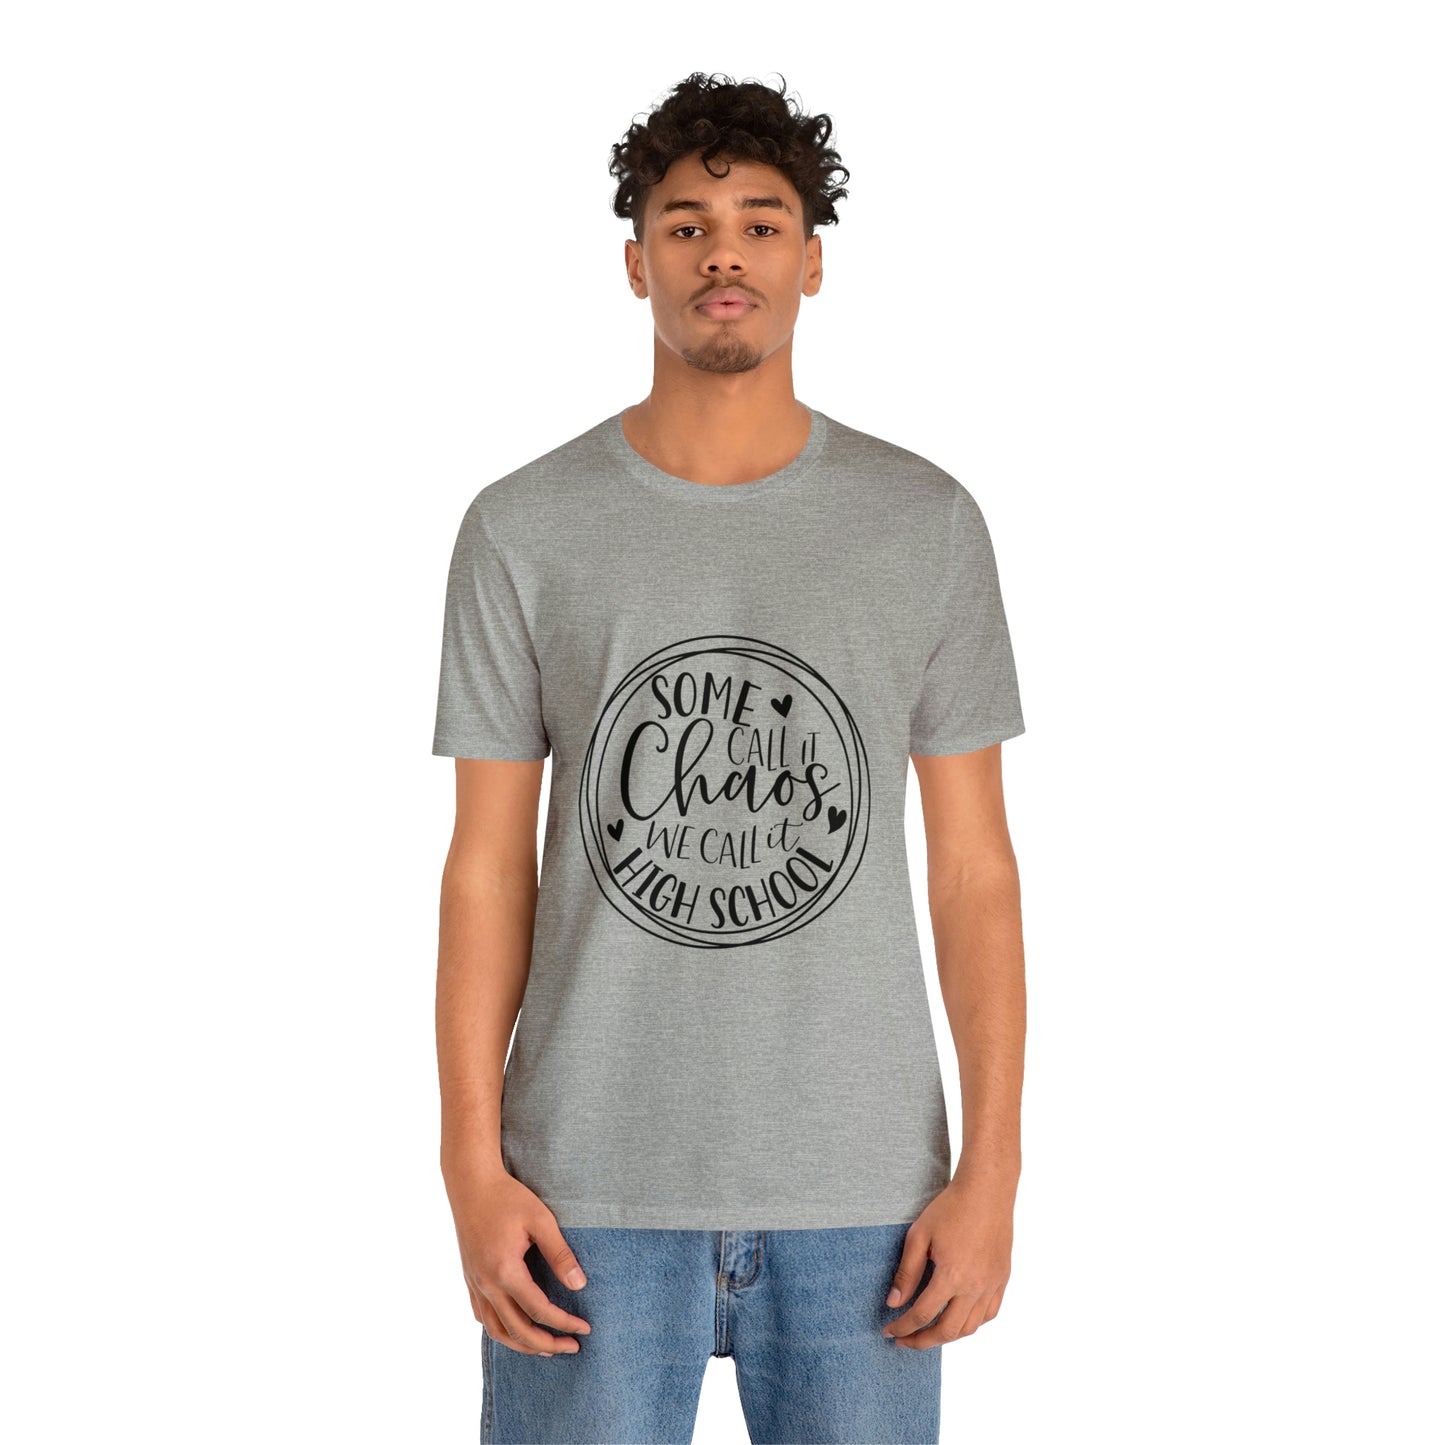 "Some Call It Chaos We Call It High School" Unisex Jersey Short Sleeve Tee